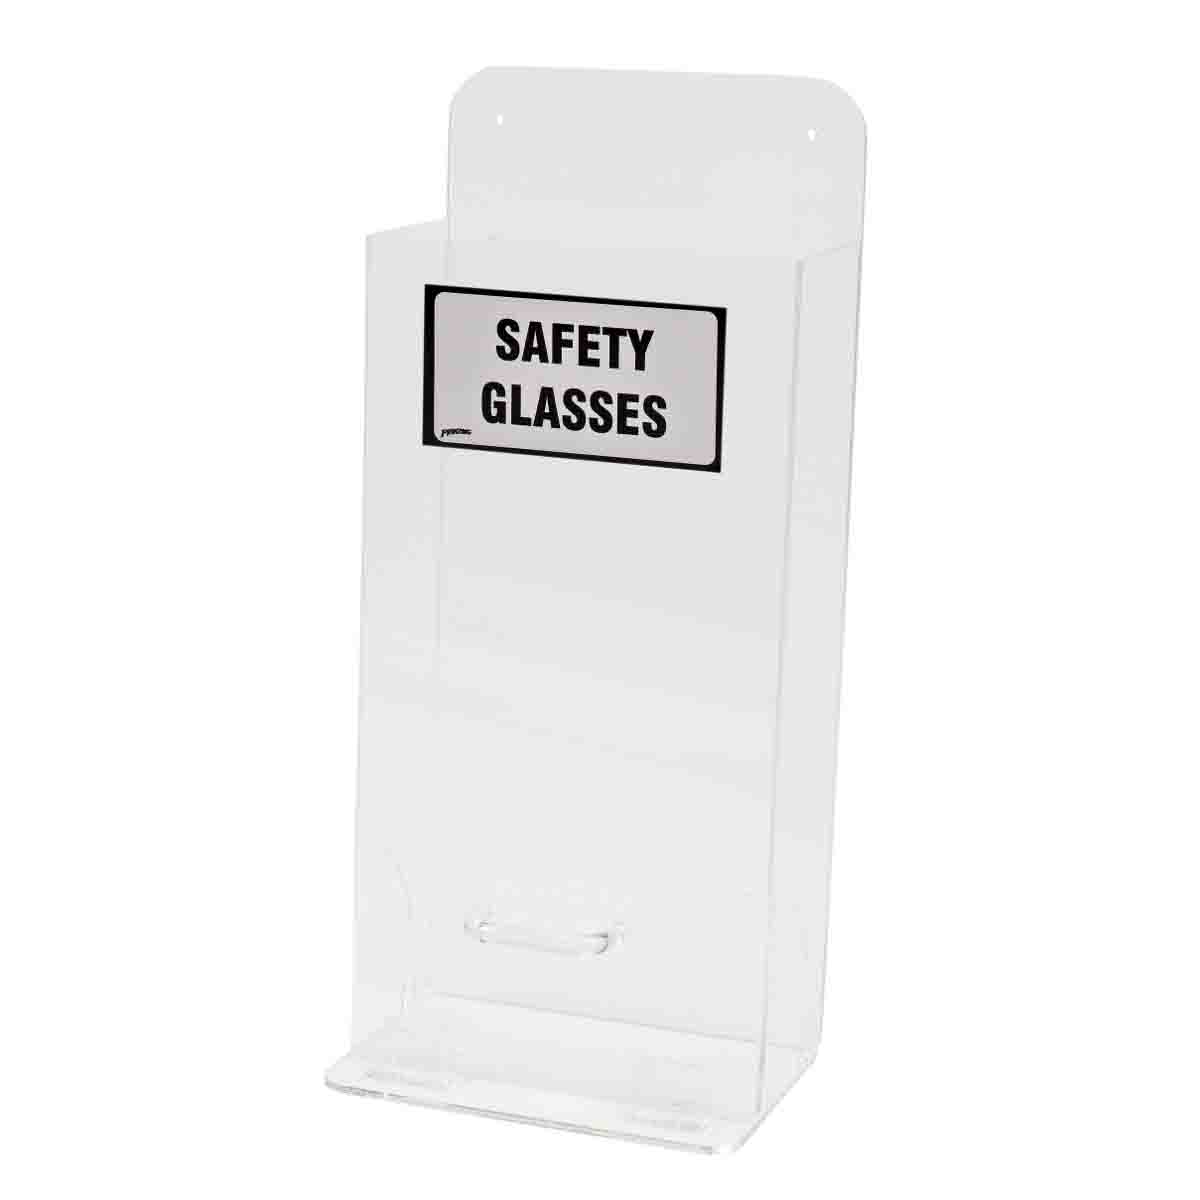 Brady® GH20N Large Capacity Eye Protection Dispenser, 20 Pair Capacity, 11-3/4 in H x 15-1/2 in W x 6-13/16 in D, Acrylic Glass, Wall Mount